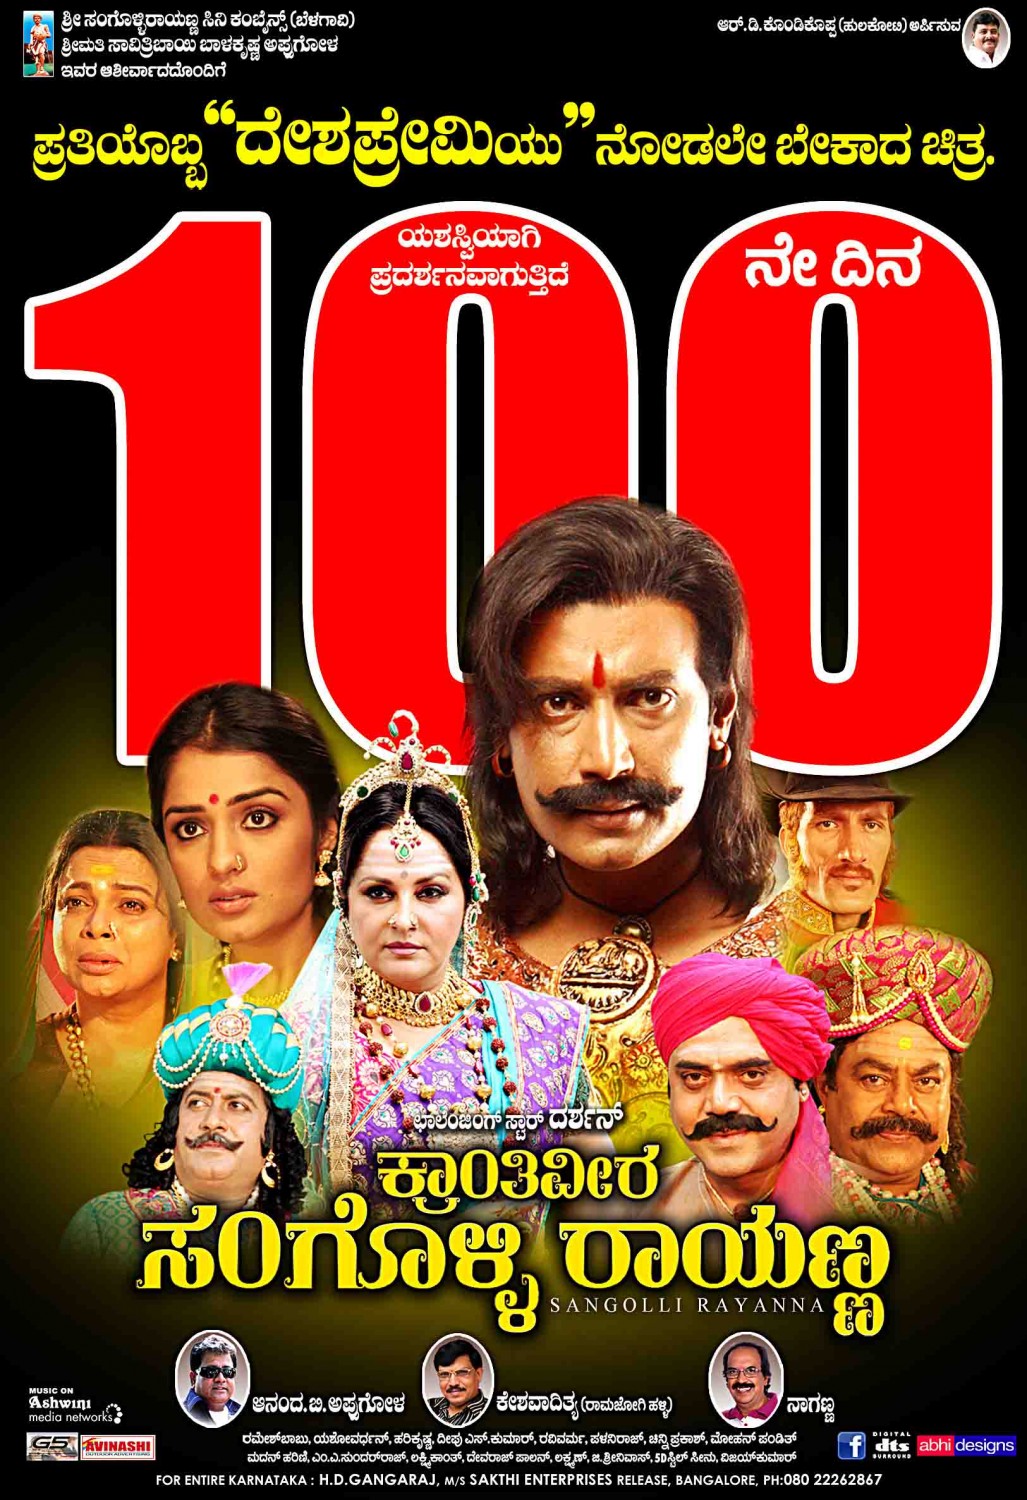 Extra Large Movie Poster Image for Sangolli Rayanna (#69 of 79)